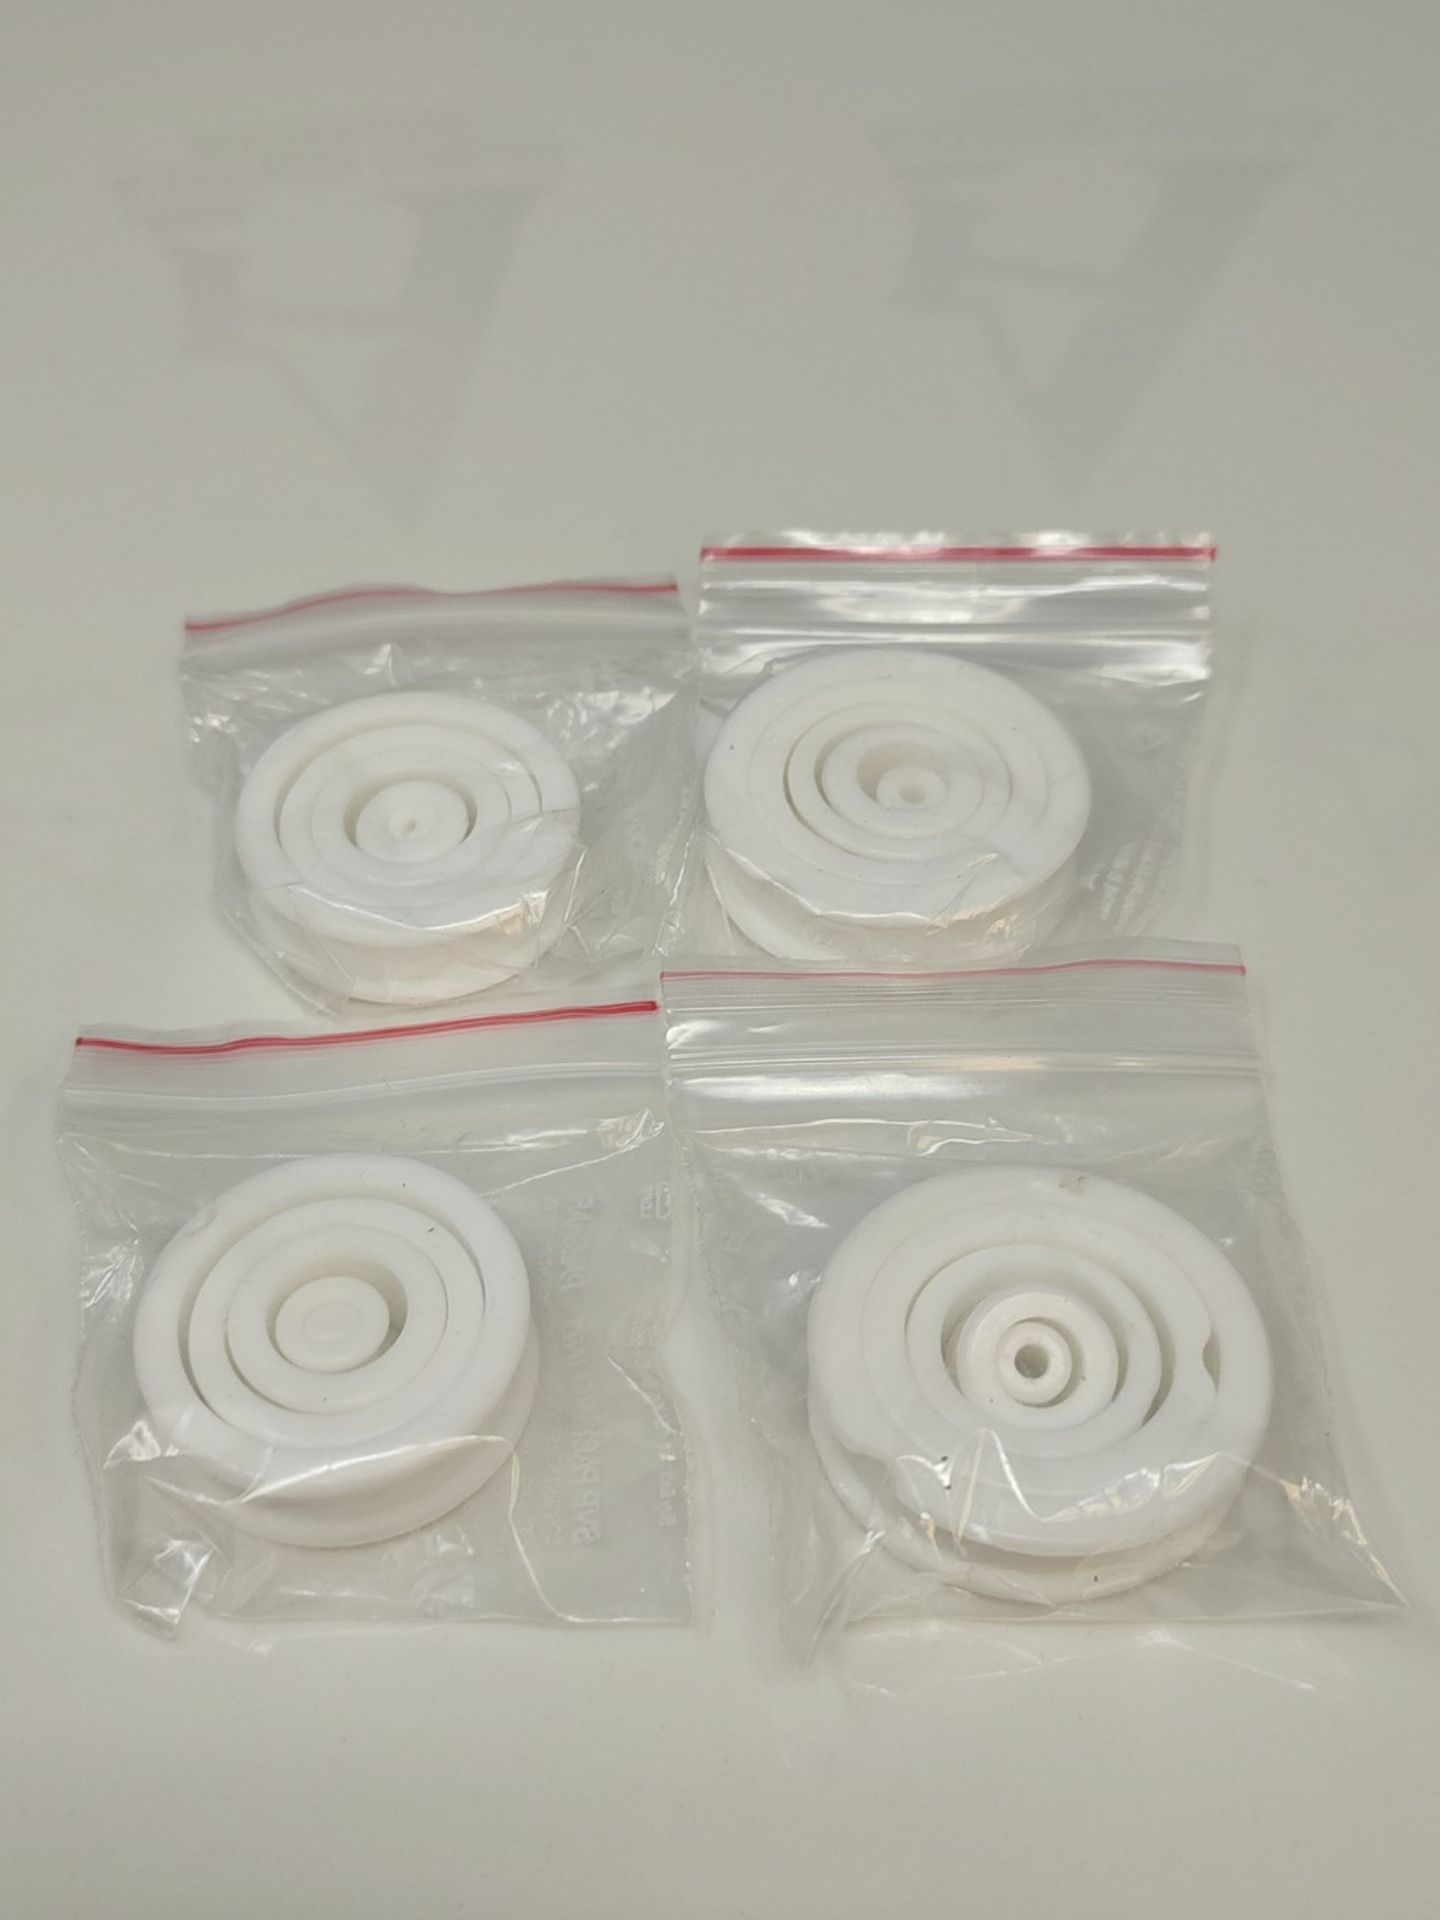 CauseHuman Phimosis Stretching Rings Set (20 Rings) - Medical Grade Silicone for Safe - Image 3 of 3